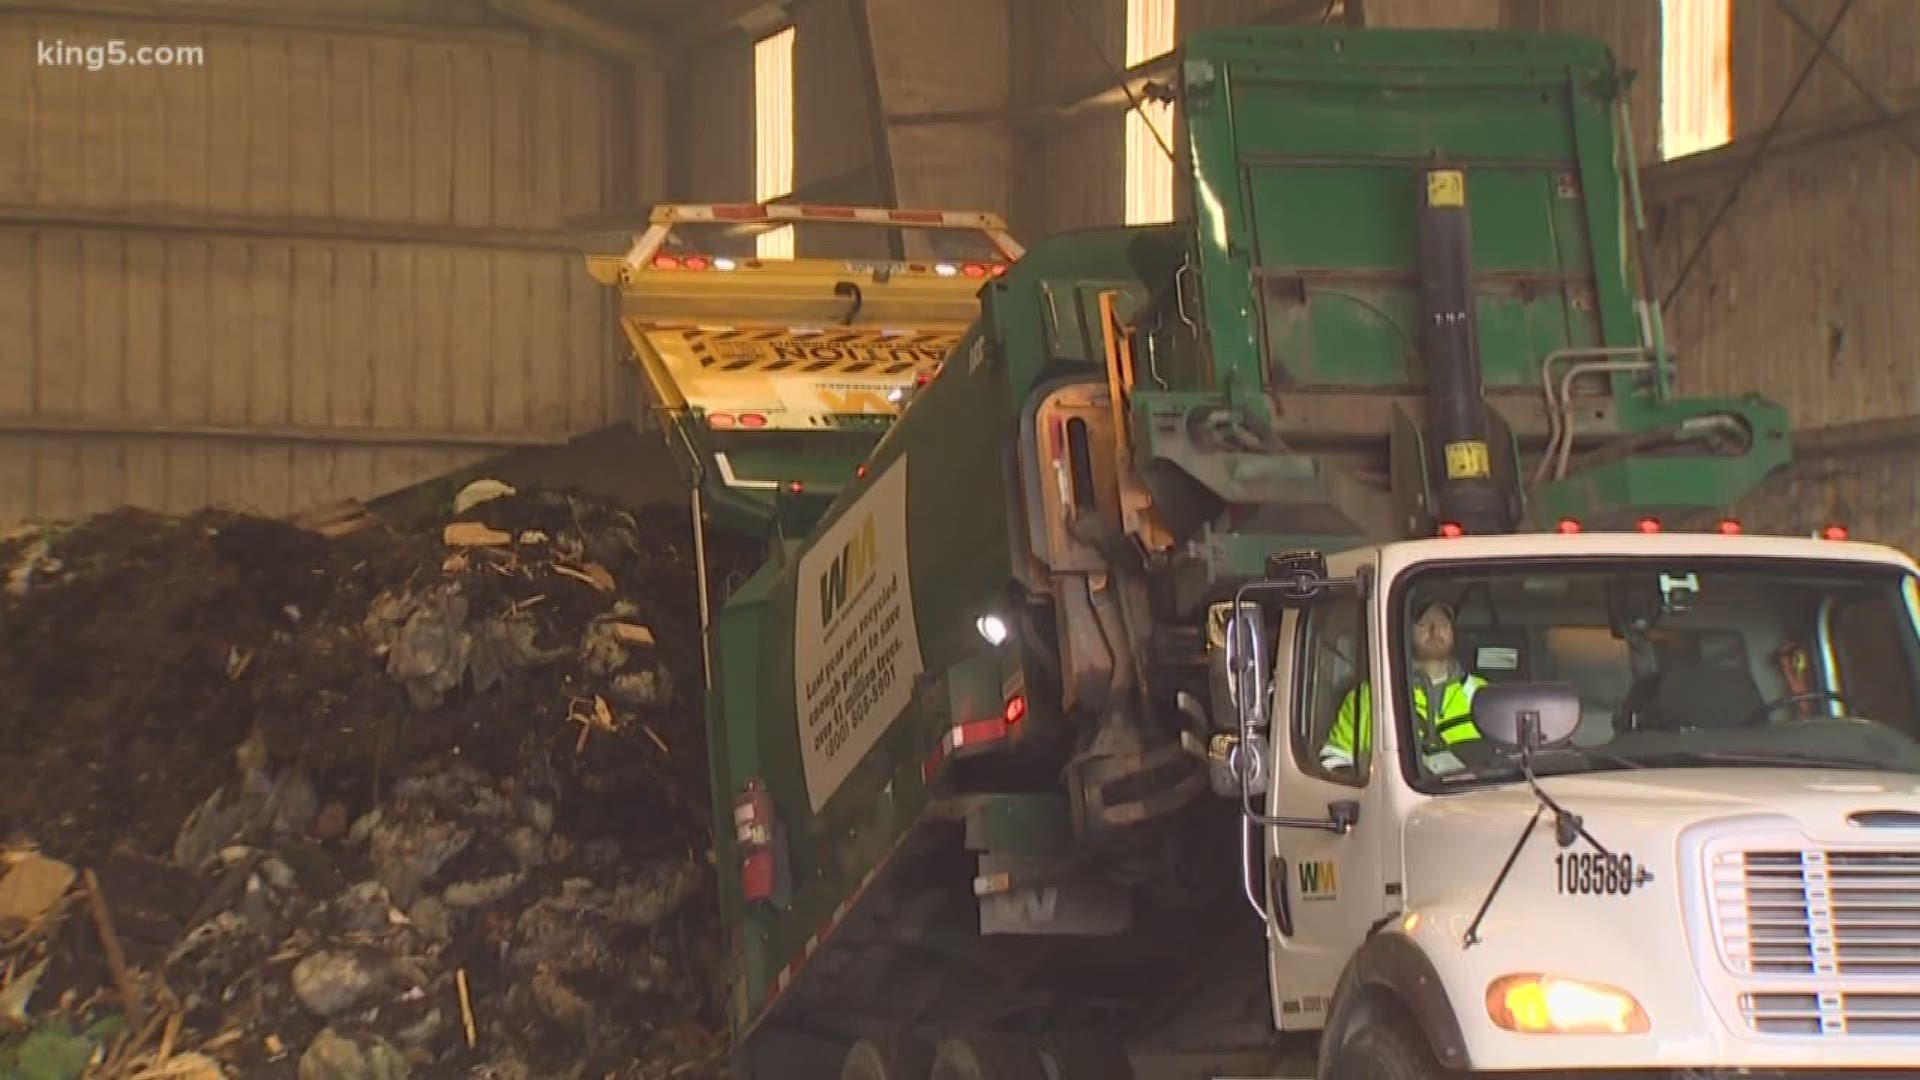 A bill making its way through the state house would make it tougher to sue composting facilities. Some of those facilities say so-called "nuisance" lawsuits are hurting the composting industry. But not everyone is on board with the legislation. KING 5 Environmental Reporter Alison Morrow shows us both sides of the debate.